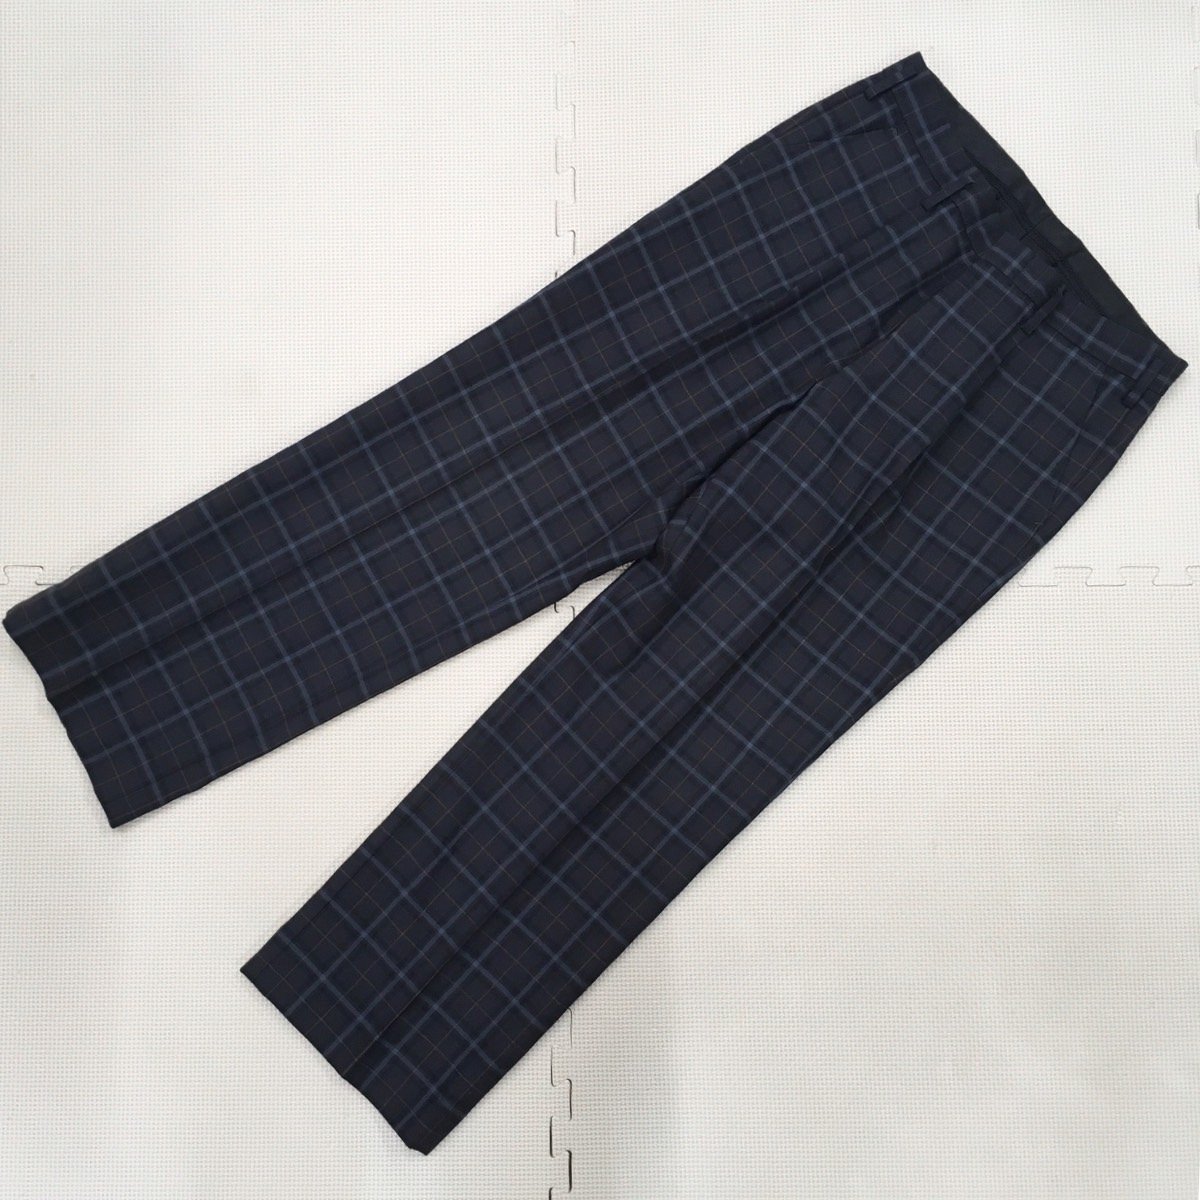 A398/T392( used ) Tochigi prefecture under . city . stone . junior high school man . uniform 1 point /W82/ total height 96/ length of the legs 71/ winter trousers / winter clothes / winter / check pattern / man . school uniform /. industry raw goods 